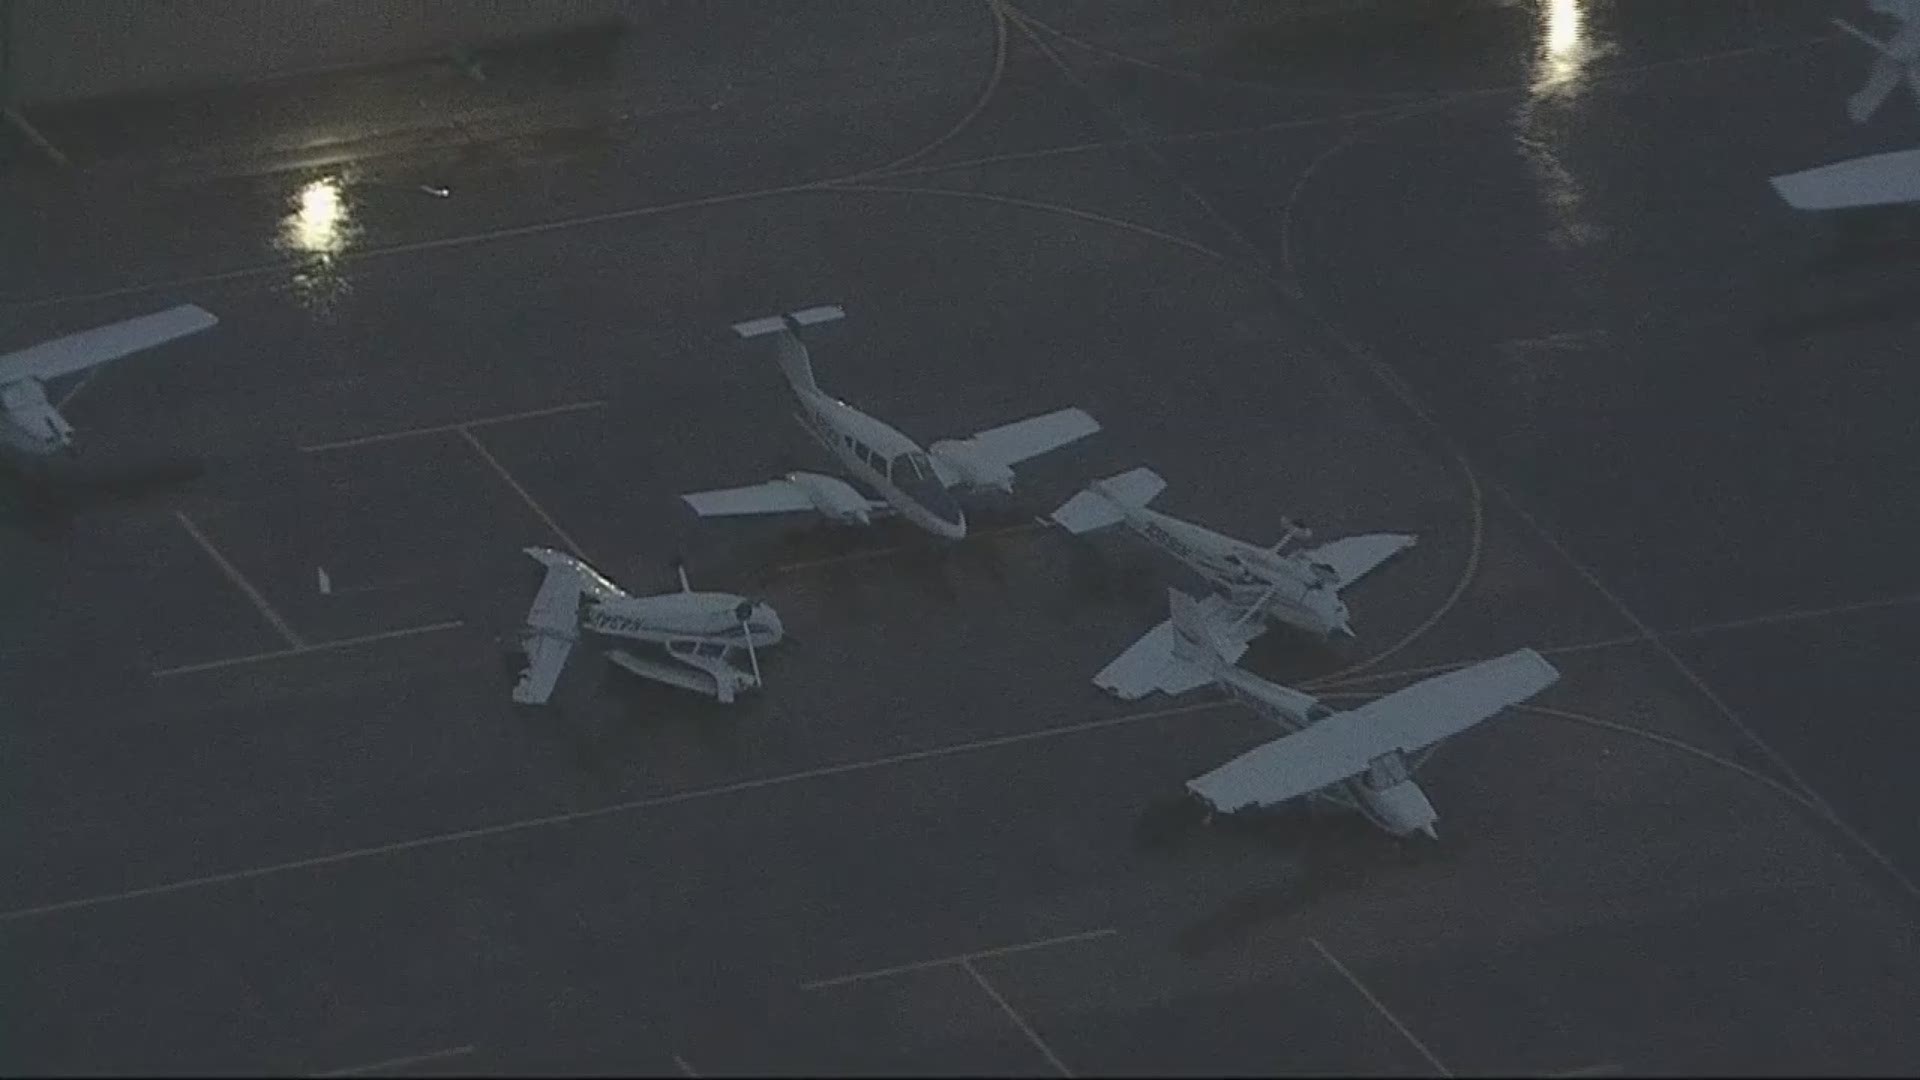 RAW VIDEO: Strong winds from storms cause damage to planes at Grand Prairie Municipal Airport